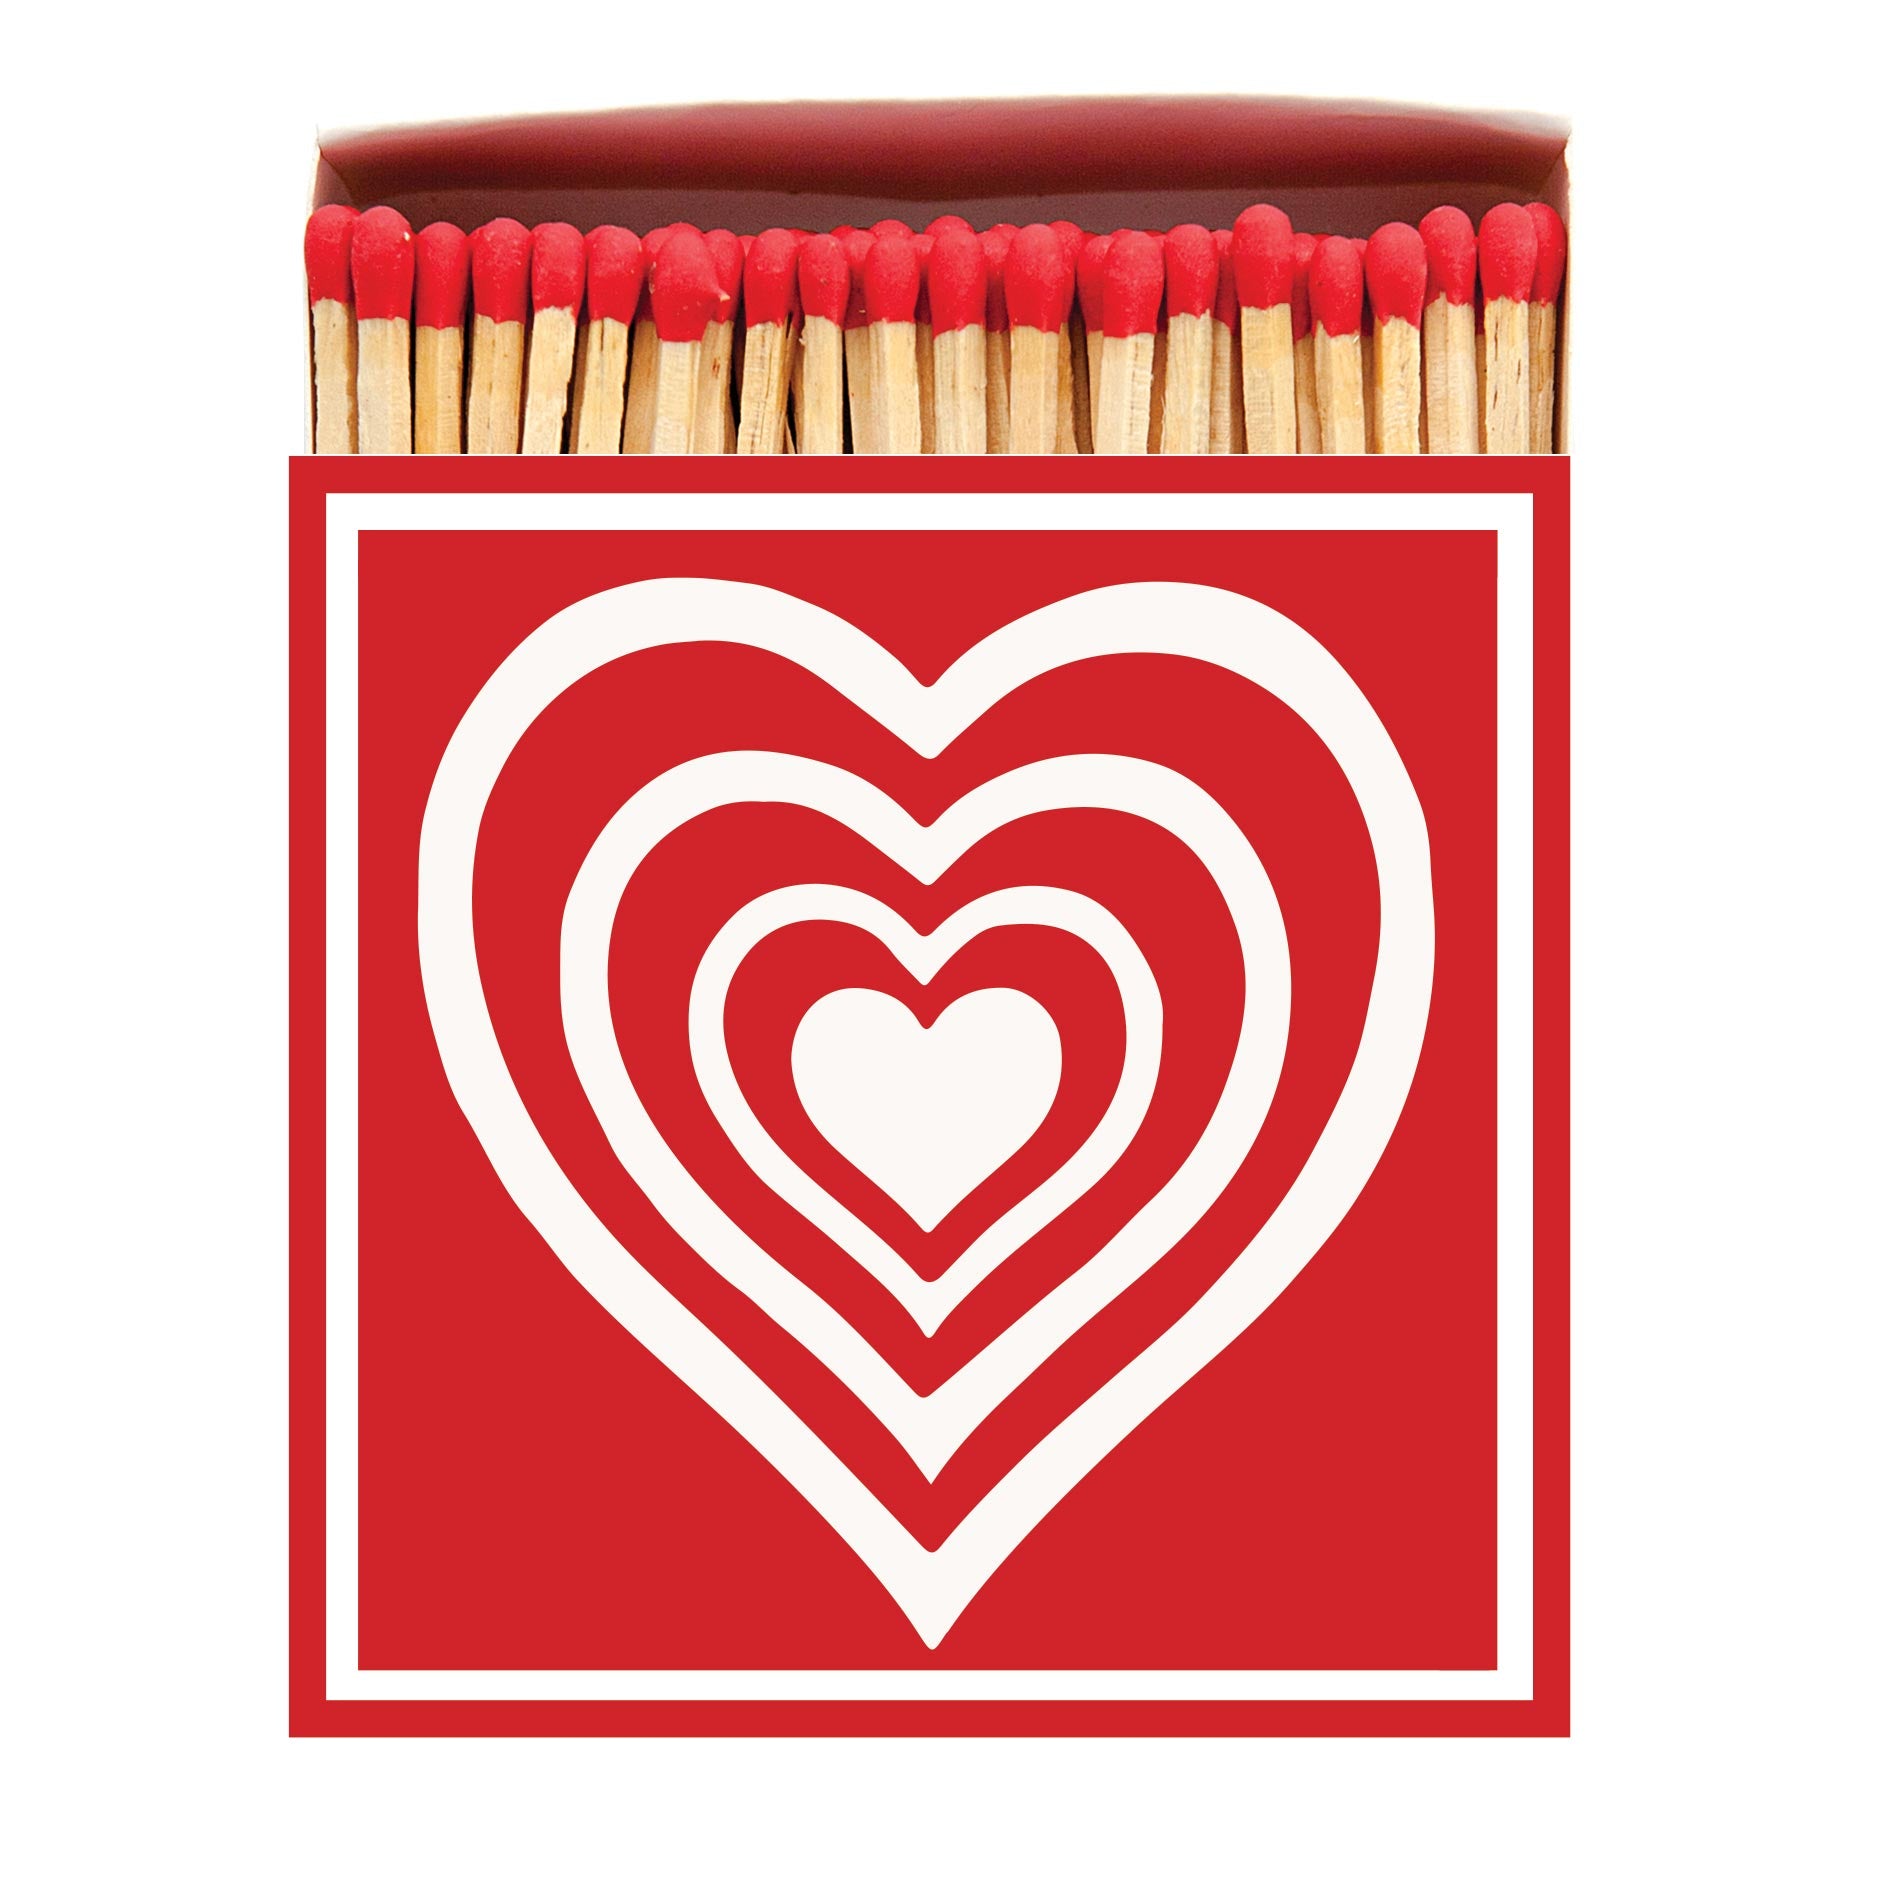 Concentric Heart - Luxury Matches from The Archivist